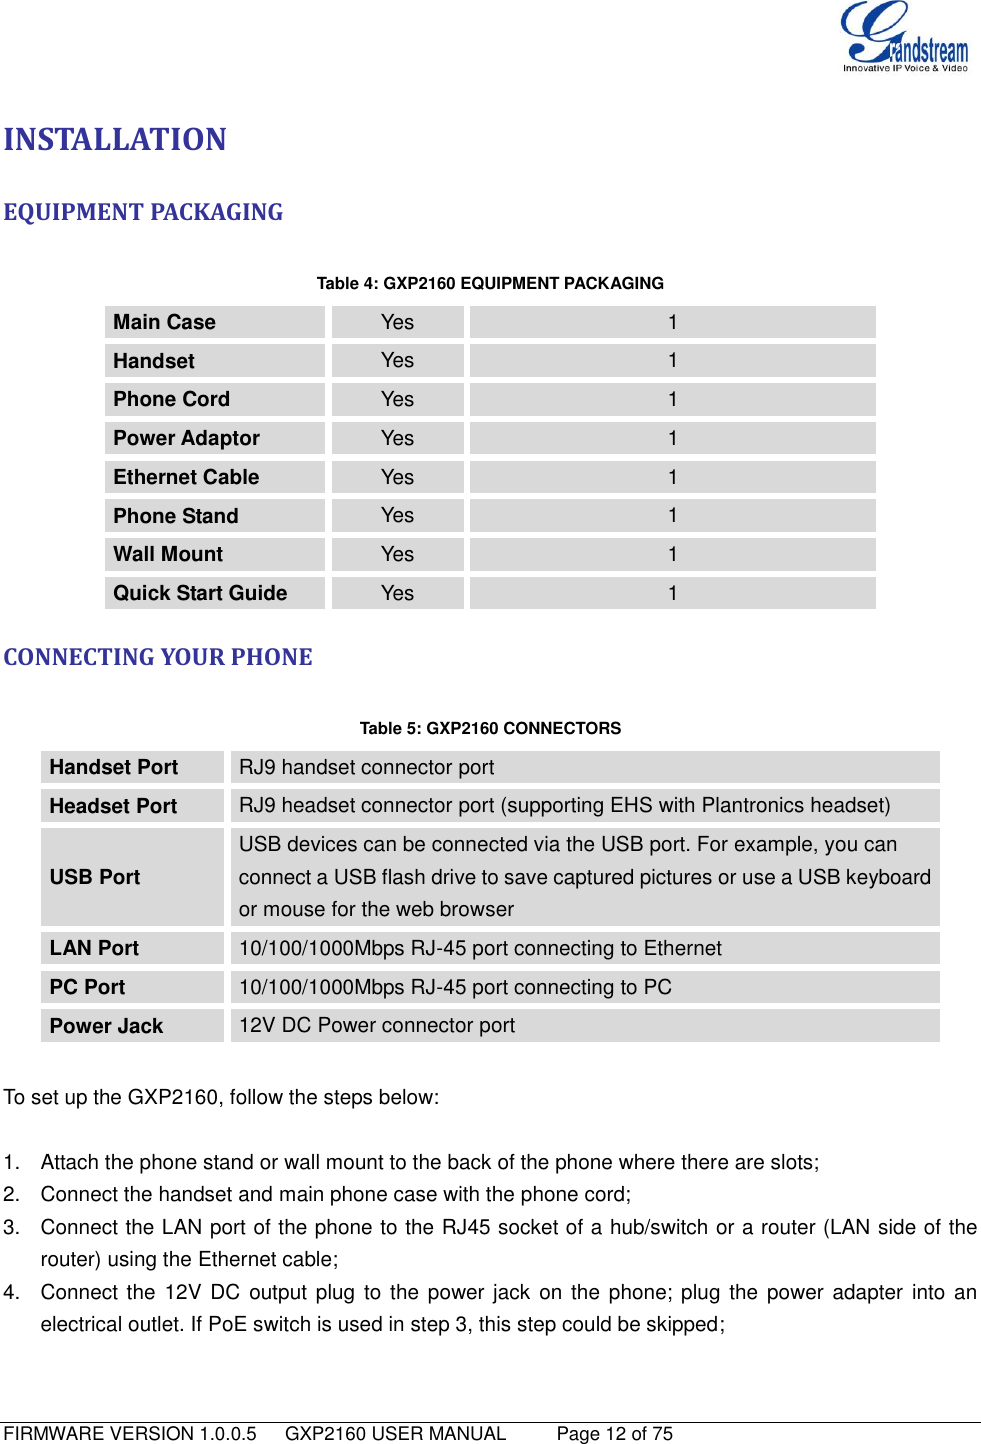   FIRMWARE VERSION 1.0.0.5   GXP2160 USER MANUAL     Page 12 of 75                                   INSTALLATION EQUIPMENT PACKAGING  Table 4: GXP2160 EQUIPMENT PACKAGING Main Case Yes 1 Handset Yes 1 Phone Cord Yes 1 Power Adaptor Yes 1 Ethernet Cable Yes 1 Phone Stand Yes 1 Wall Mount Yes 1 Quick Start Guide Yes 1 CONNECTING YOUR PHONE  Table 5: GXP2160 CONNECTORS Handset Port RJ9 handset connector port Headset Port RJ9 headset connector port (supporting EHS with Plantronics headset) USB Port USB devices can be connected via the USB port. For example, you can connect a USB flash drive to save captured pictures or use a USB keyboard or mouse for the web browser LAN Port 10/100/1000Mbps RJ-45 port connecting to Ethernet PC Port 10/100/1000Mbps RJ-45 port connecting to PC Power Jack 12V DC Power connector port  To set up the GXP2160, follow the steps below:  1.  Attach the phone stand or wall mount to the back of the phone where there are slots; 2.  Connect the handset and main phone case with the phone cord; 3.  Connect the LAN port of the phone to the RJ45 socket of a hub/switch or a router (LAN side of the router) using the Ethernet cable; 4.  Connect the  12V  DC  output plug to  the  power jack  on the phone; plug  the  power  adapter  into  an electrical outlet. If PoE switch is used in step 3, this step could be skipped; 